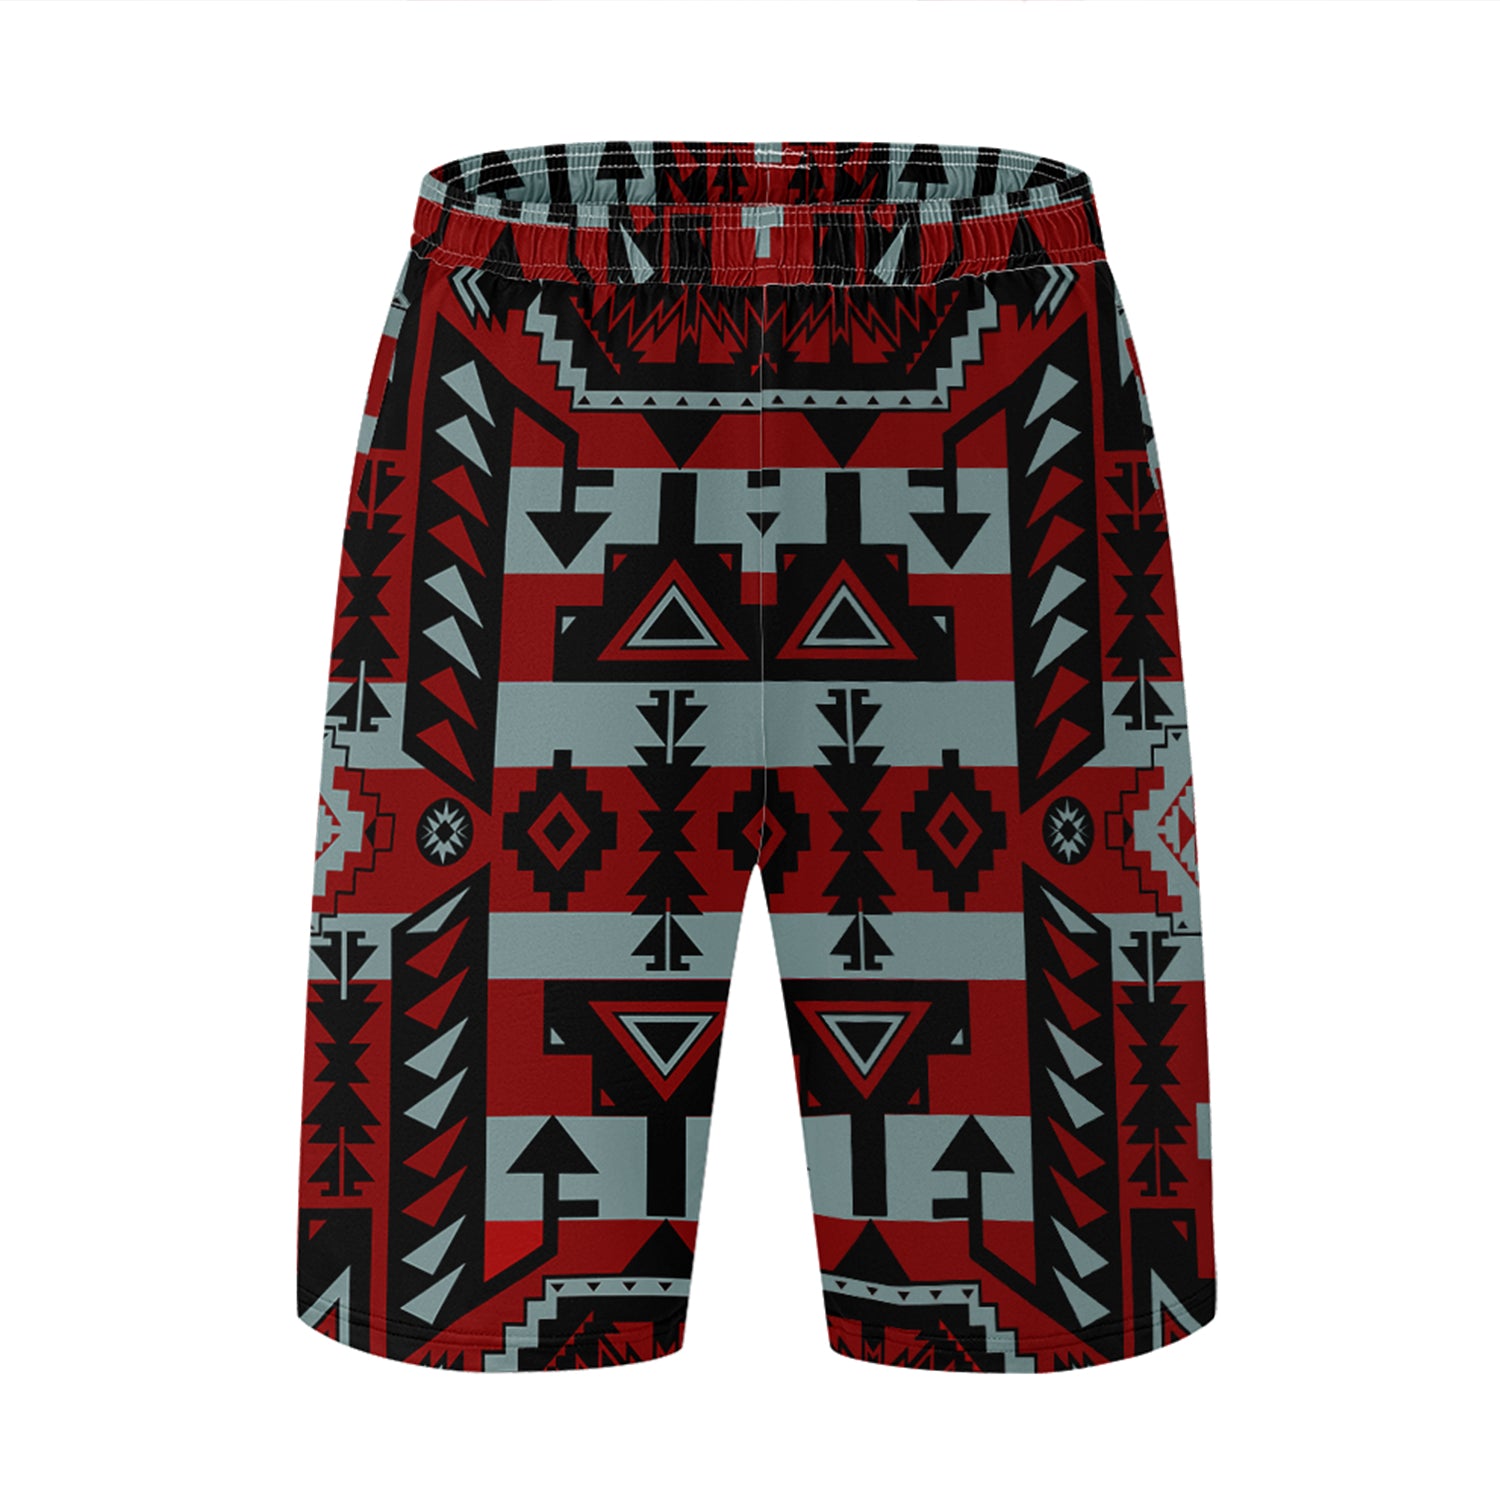 Chiefs Mountain Candy Sierra Dark Athletic Shorts with Pockets